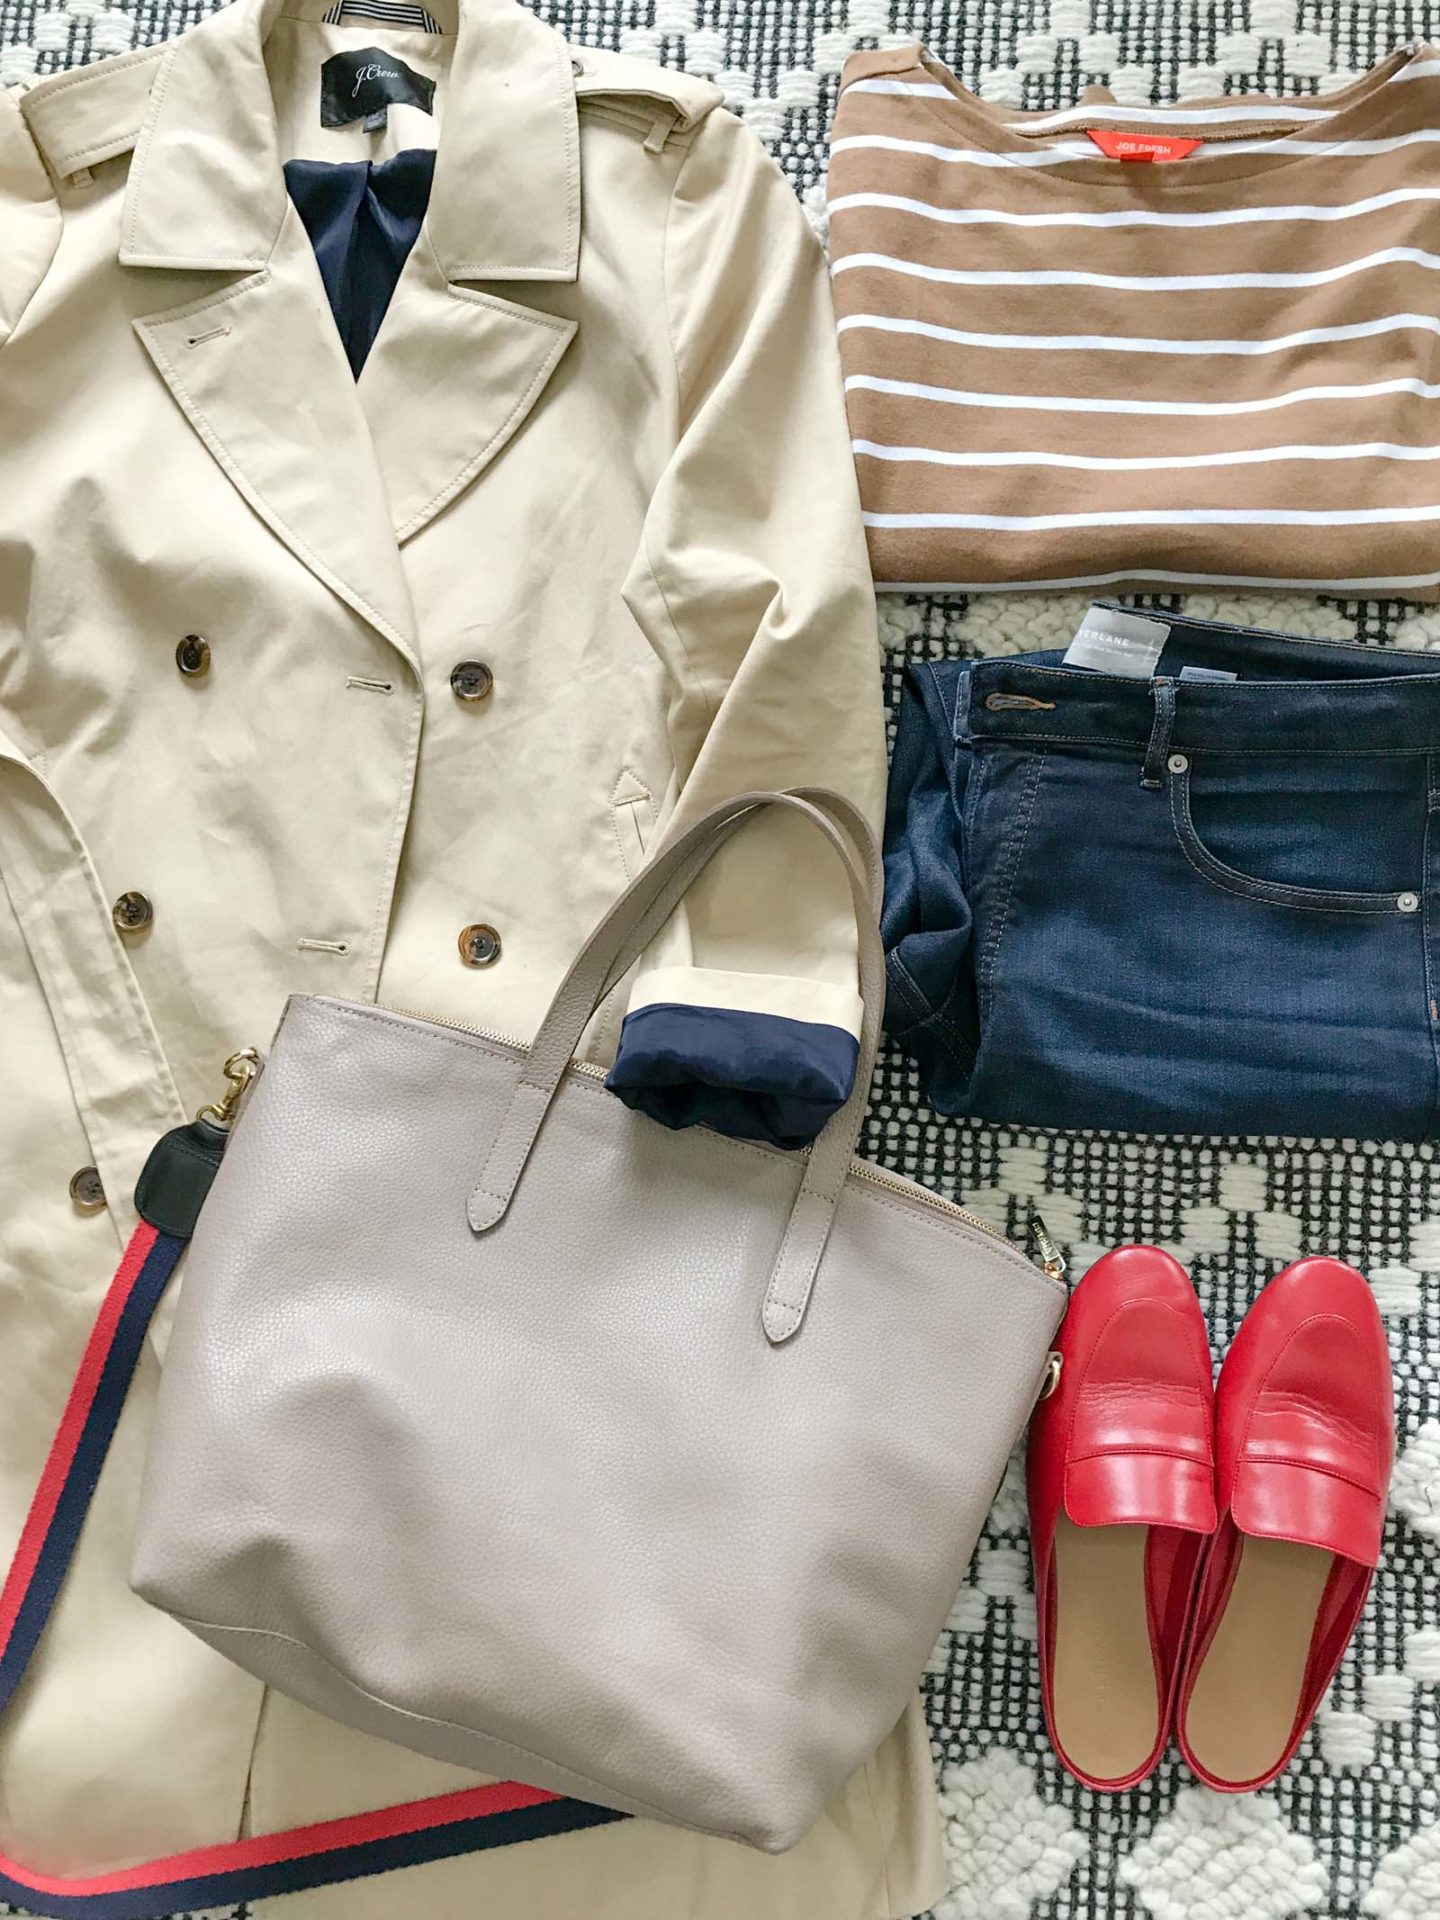 neutral trench coat outfit